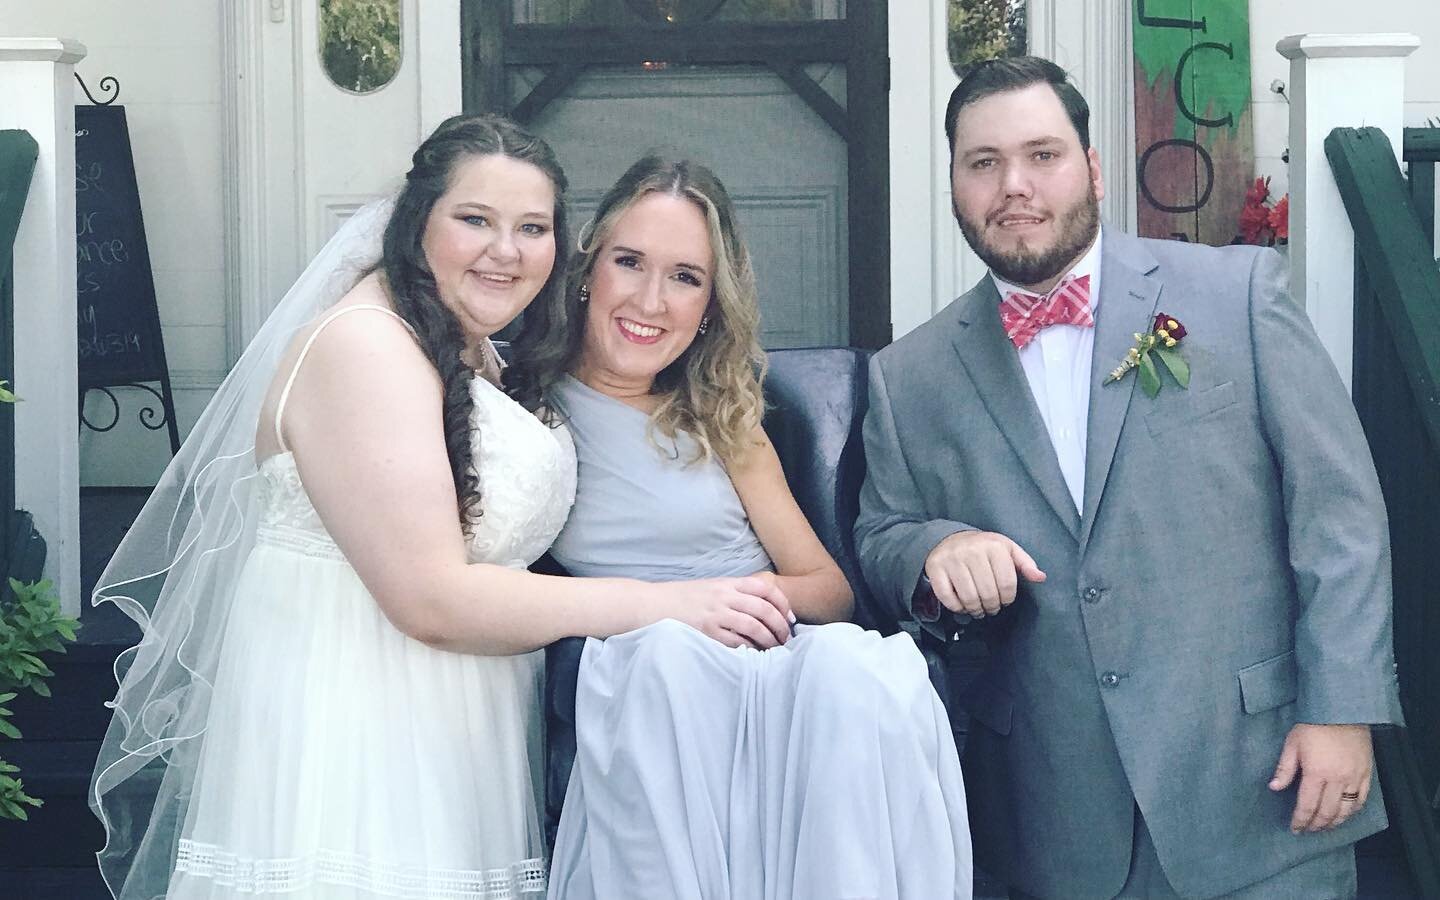 Was honored to stand with these two on their wedding day this weekend! 

Ecclesiastes 4:12 says, &ldquo;And if one prevail against him, two shall withstand him; and a threefold cord is not quickly broken.&rdquo; 

With God at the center, marriage is 